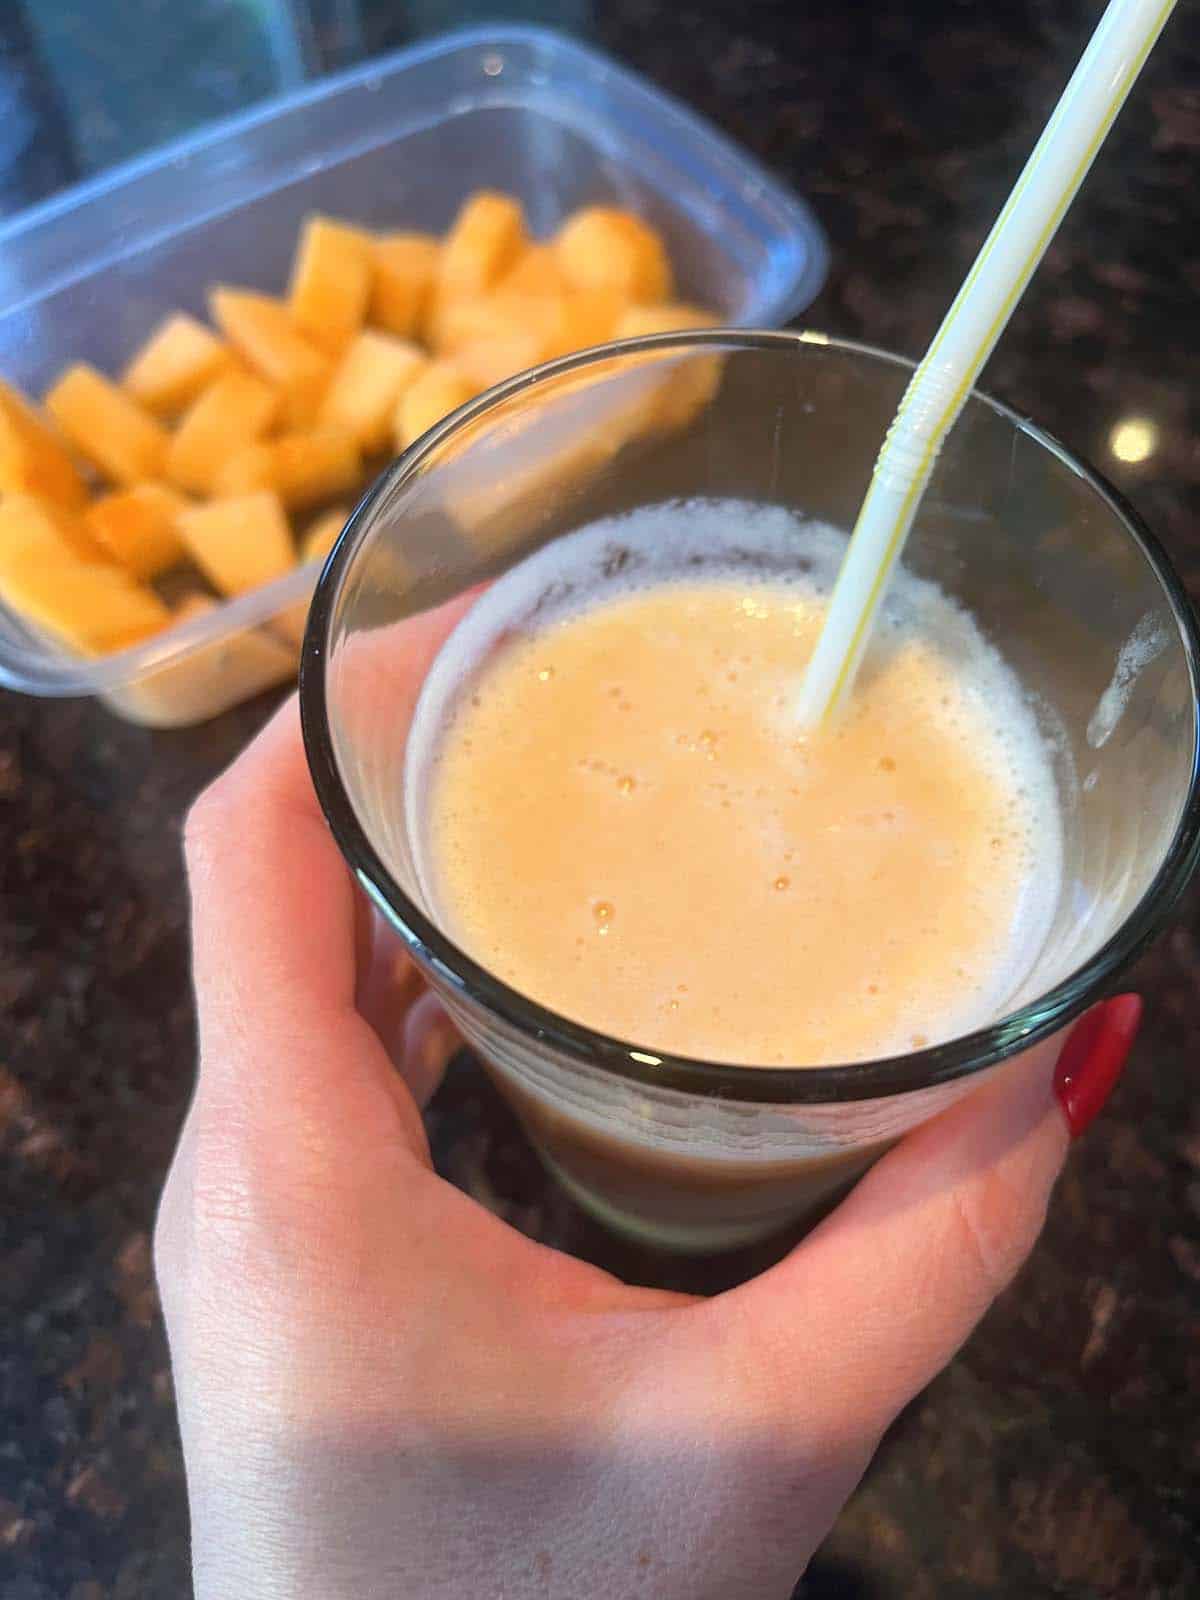 Cantaloupe Smoothie Recipe  Healthy, 2 Ingredients, No Added Sugar  Melanie Cooks [Video]